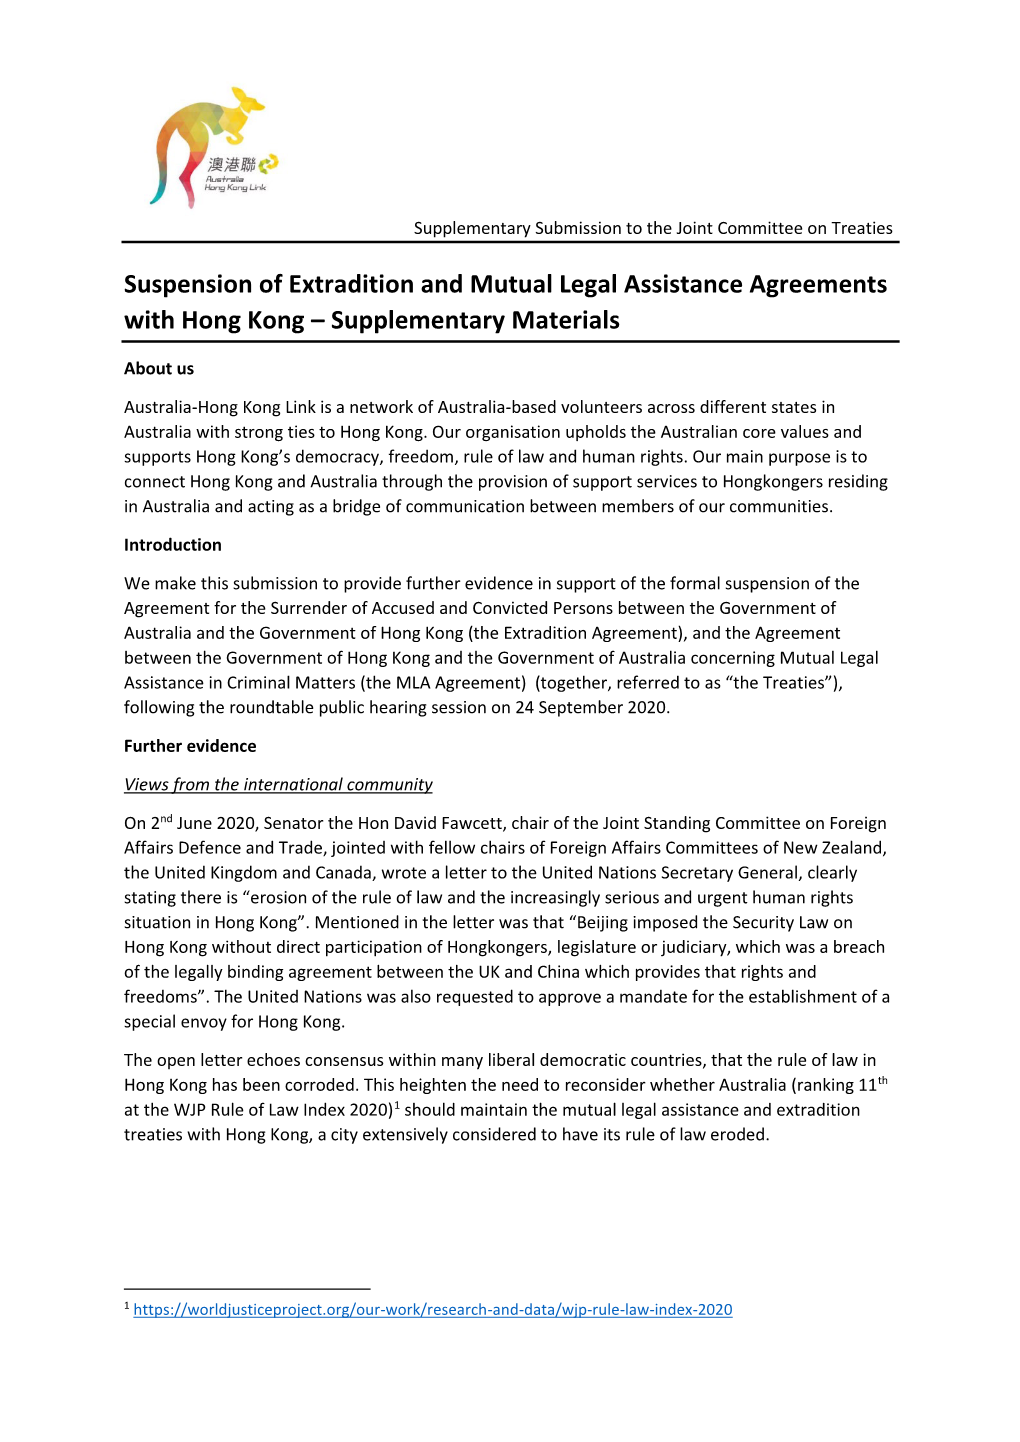 Suspension of Extradition and Mutual Legal Assistance Agreements with Hong Kong – Supplementary Materials